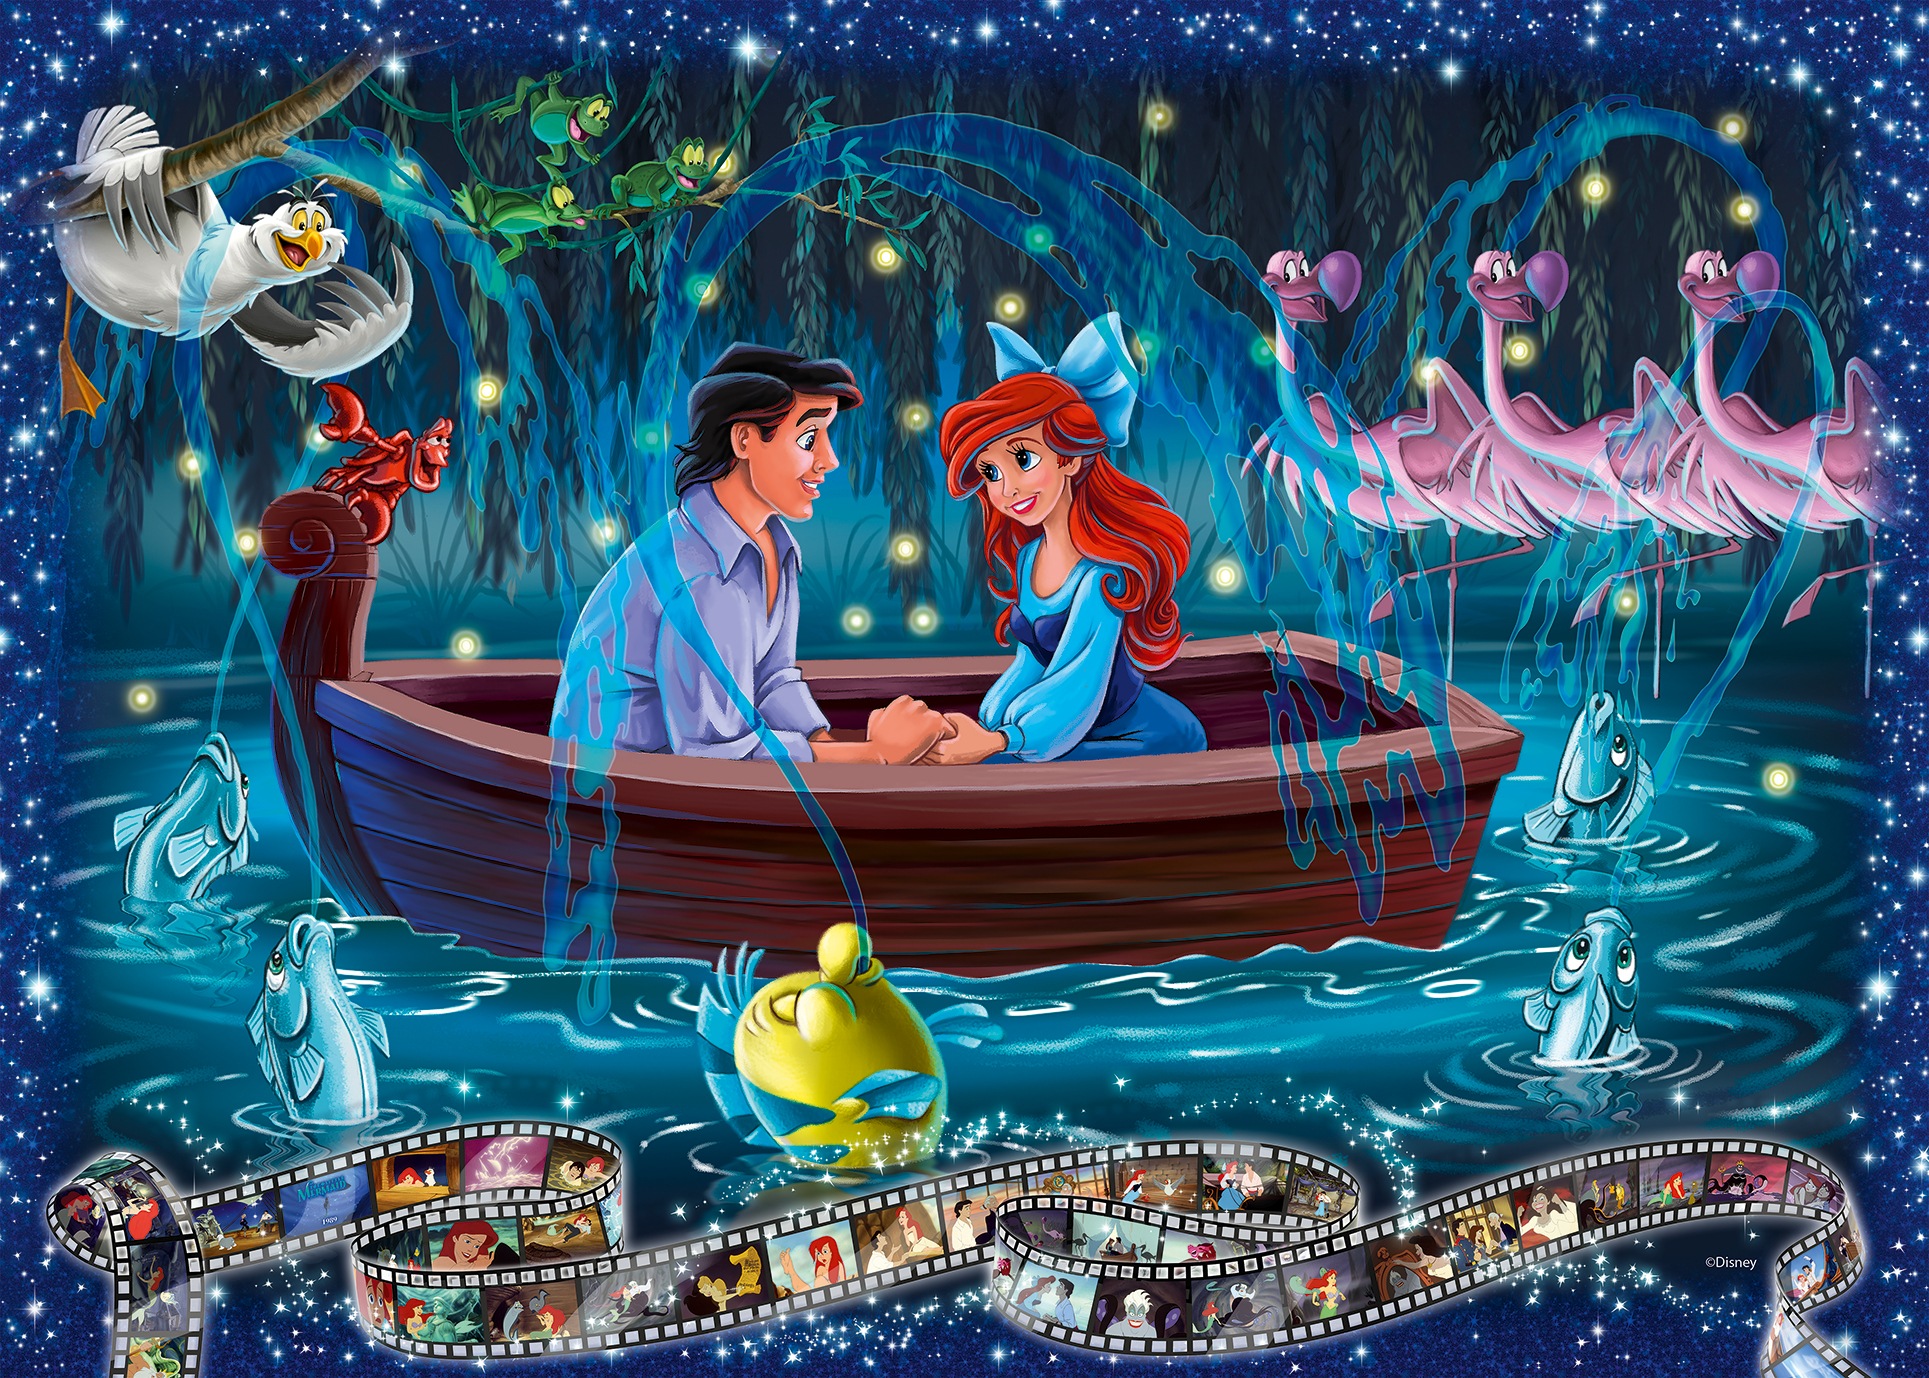 Ravensburger Puzzle »Collector's Edition - Disney Classics, Arielle«, Made in Germany; FSC® - schützt Wald - weltweit